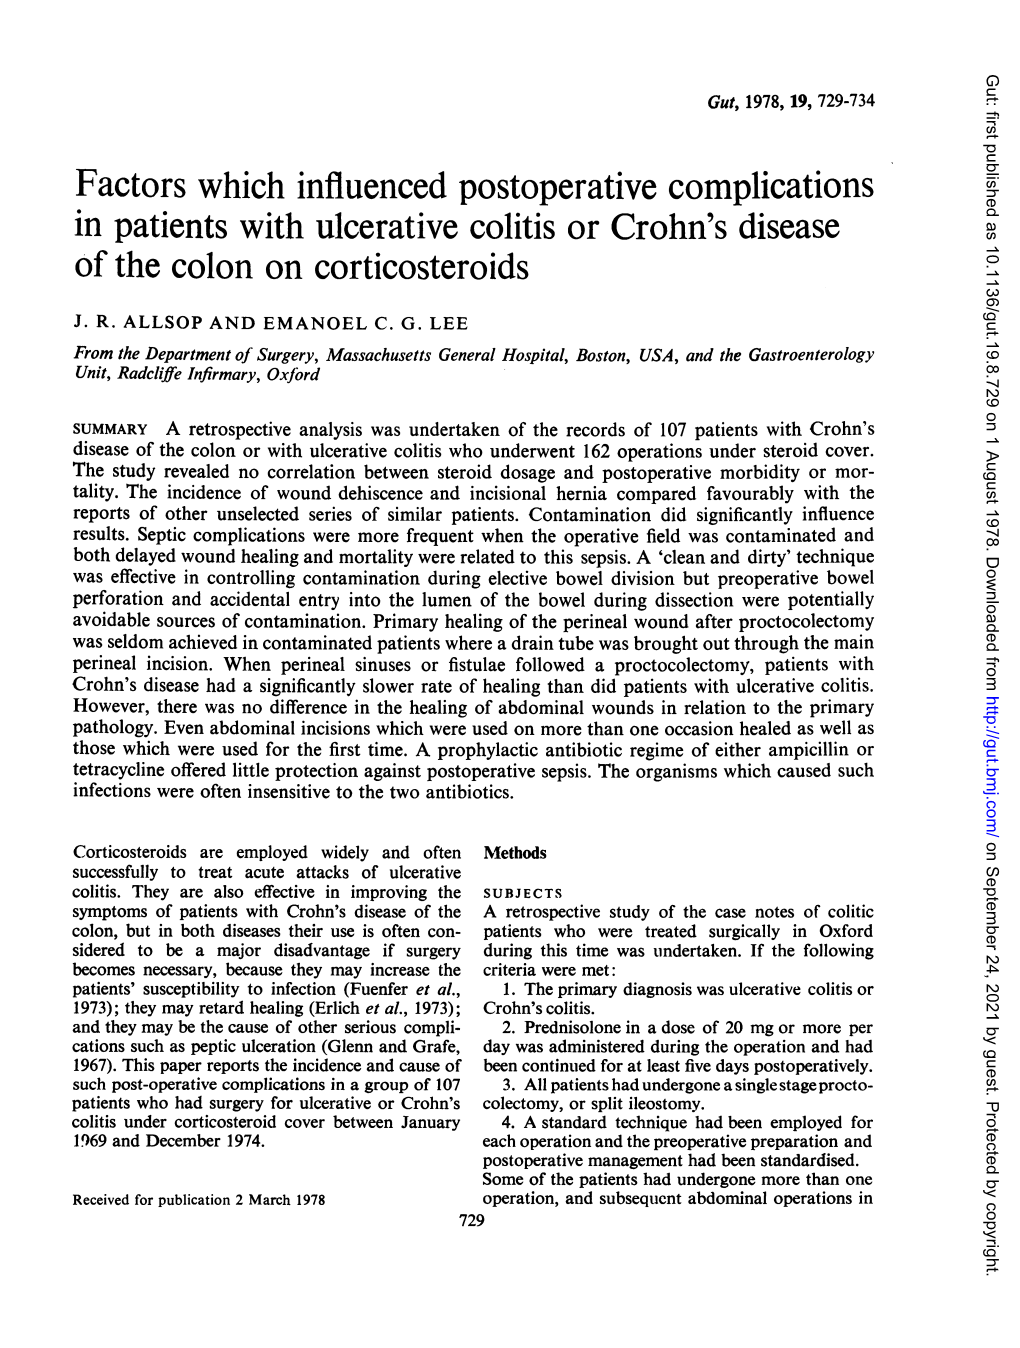 Factors Which Influenced Postoperative Complications of the Colon on Corticosteroids